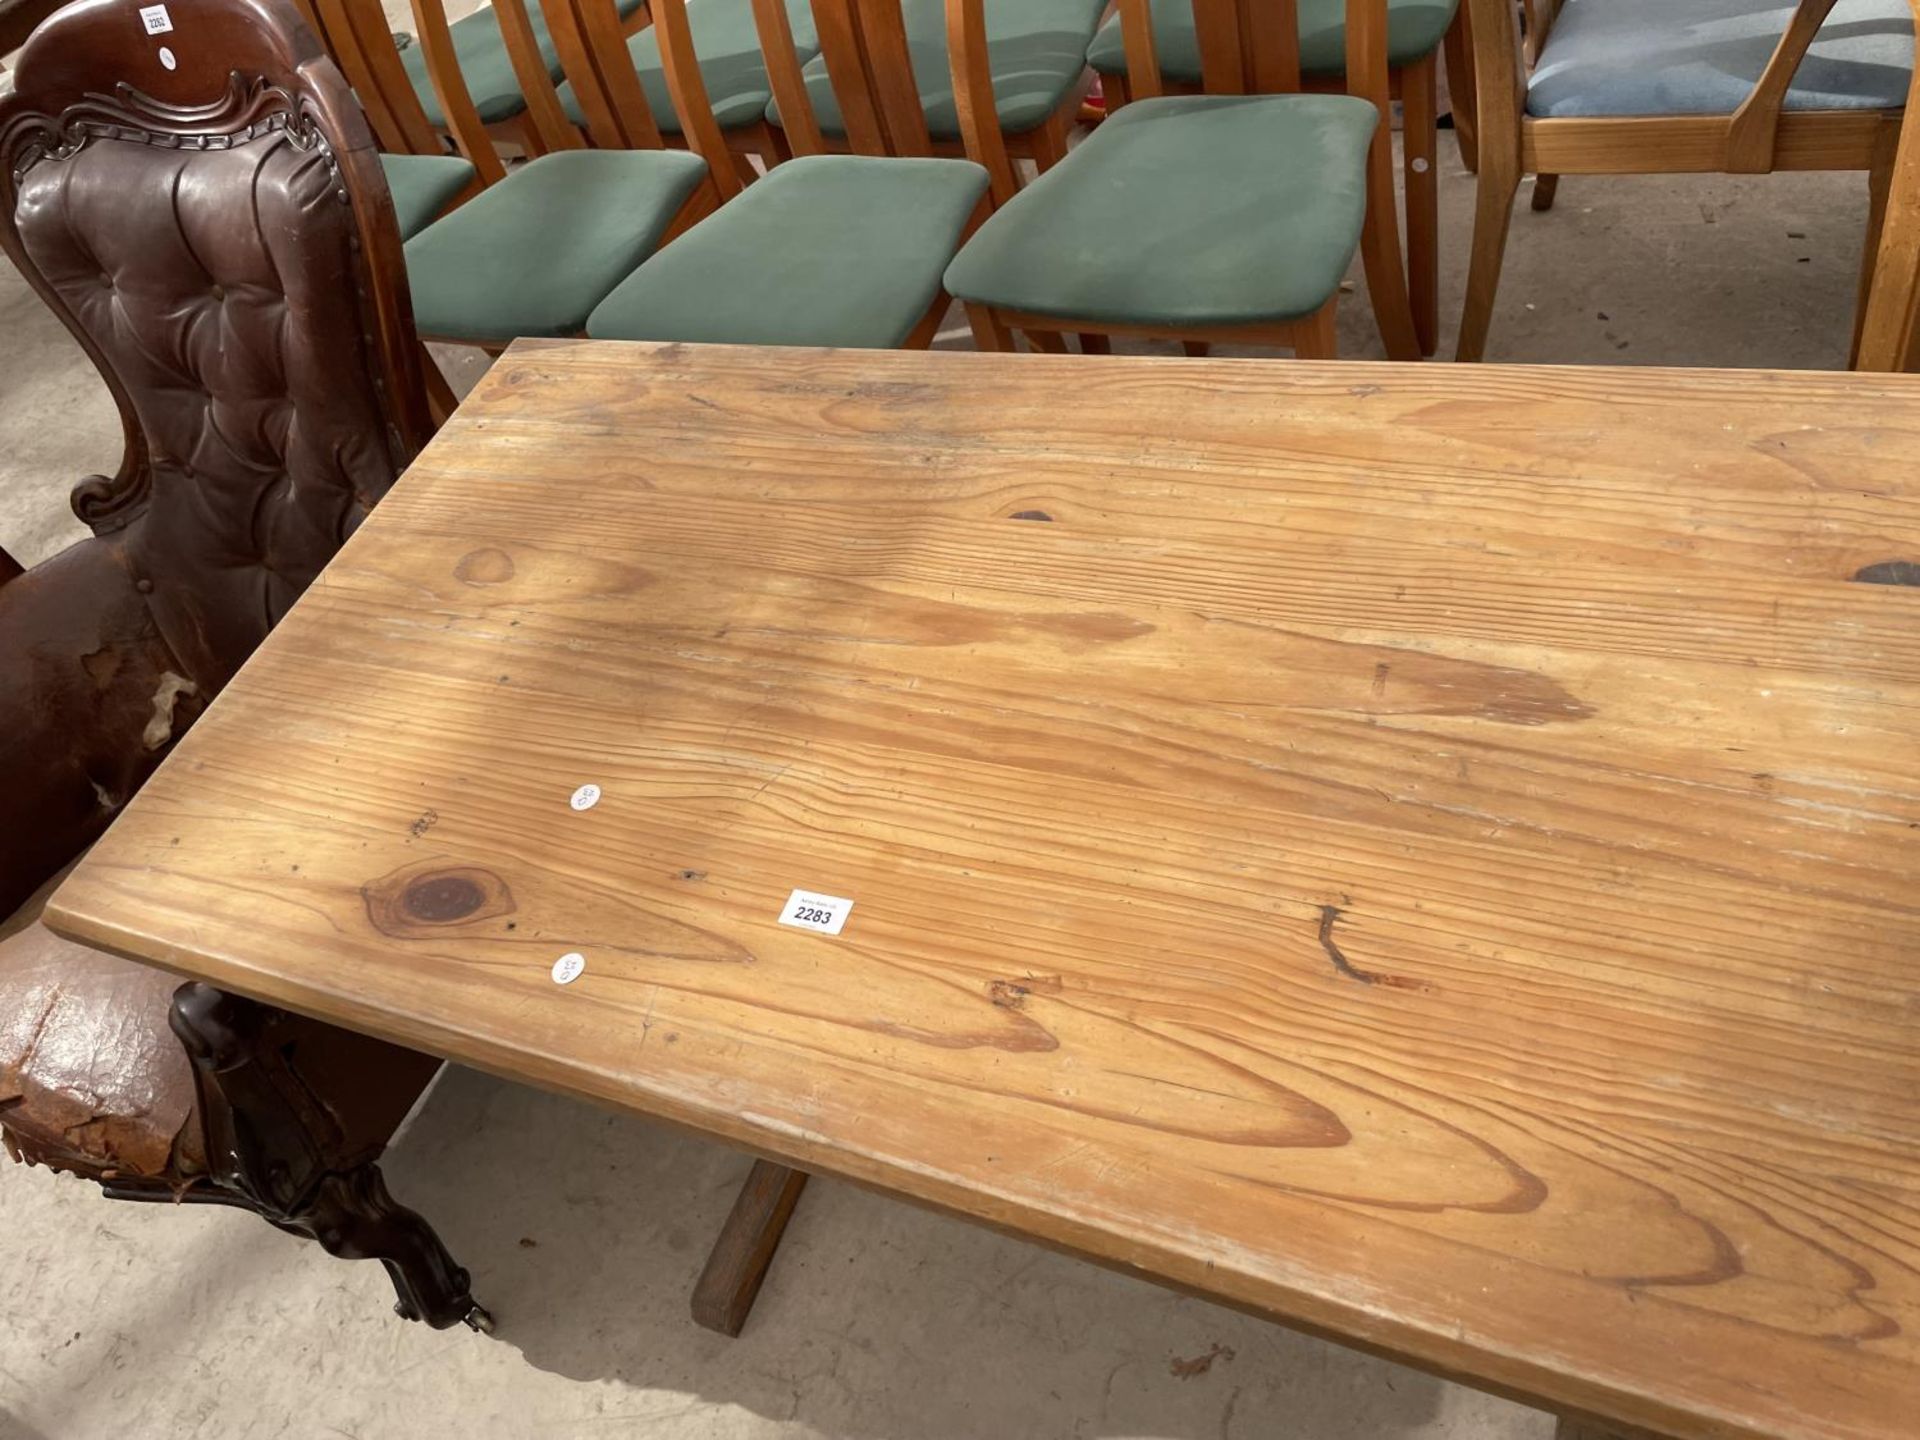 A MODERN PINE KITCHEN TABLE, 44X23" - Image 2 of 3